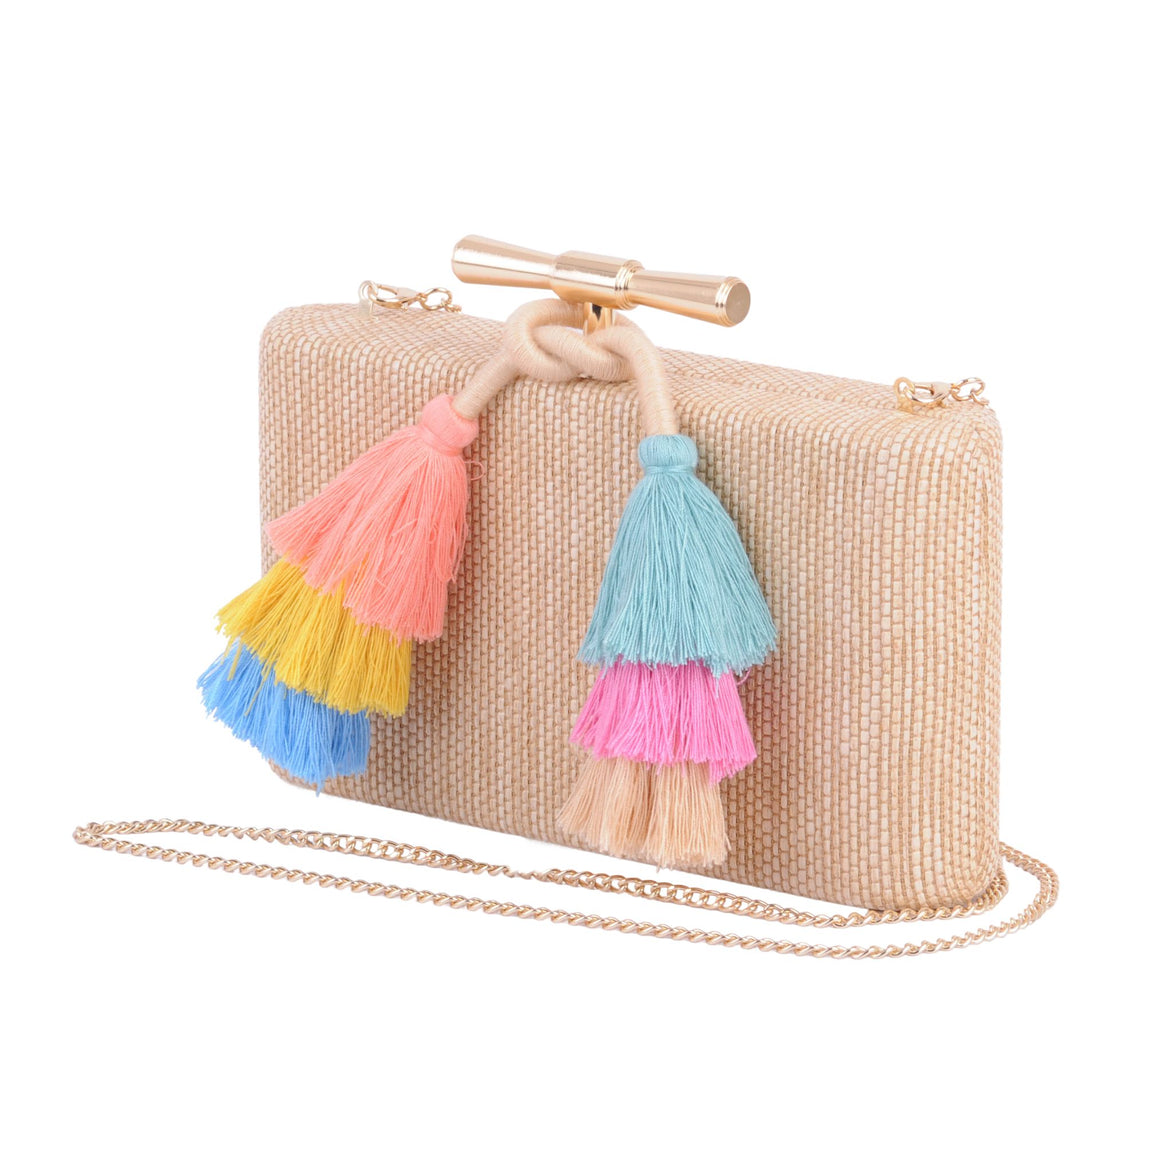 1608 - Gilded Glamour: Gold Bar Hardware Raffia Clutch with Colorful Tassel and Chain Crossbody Strap